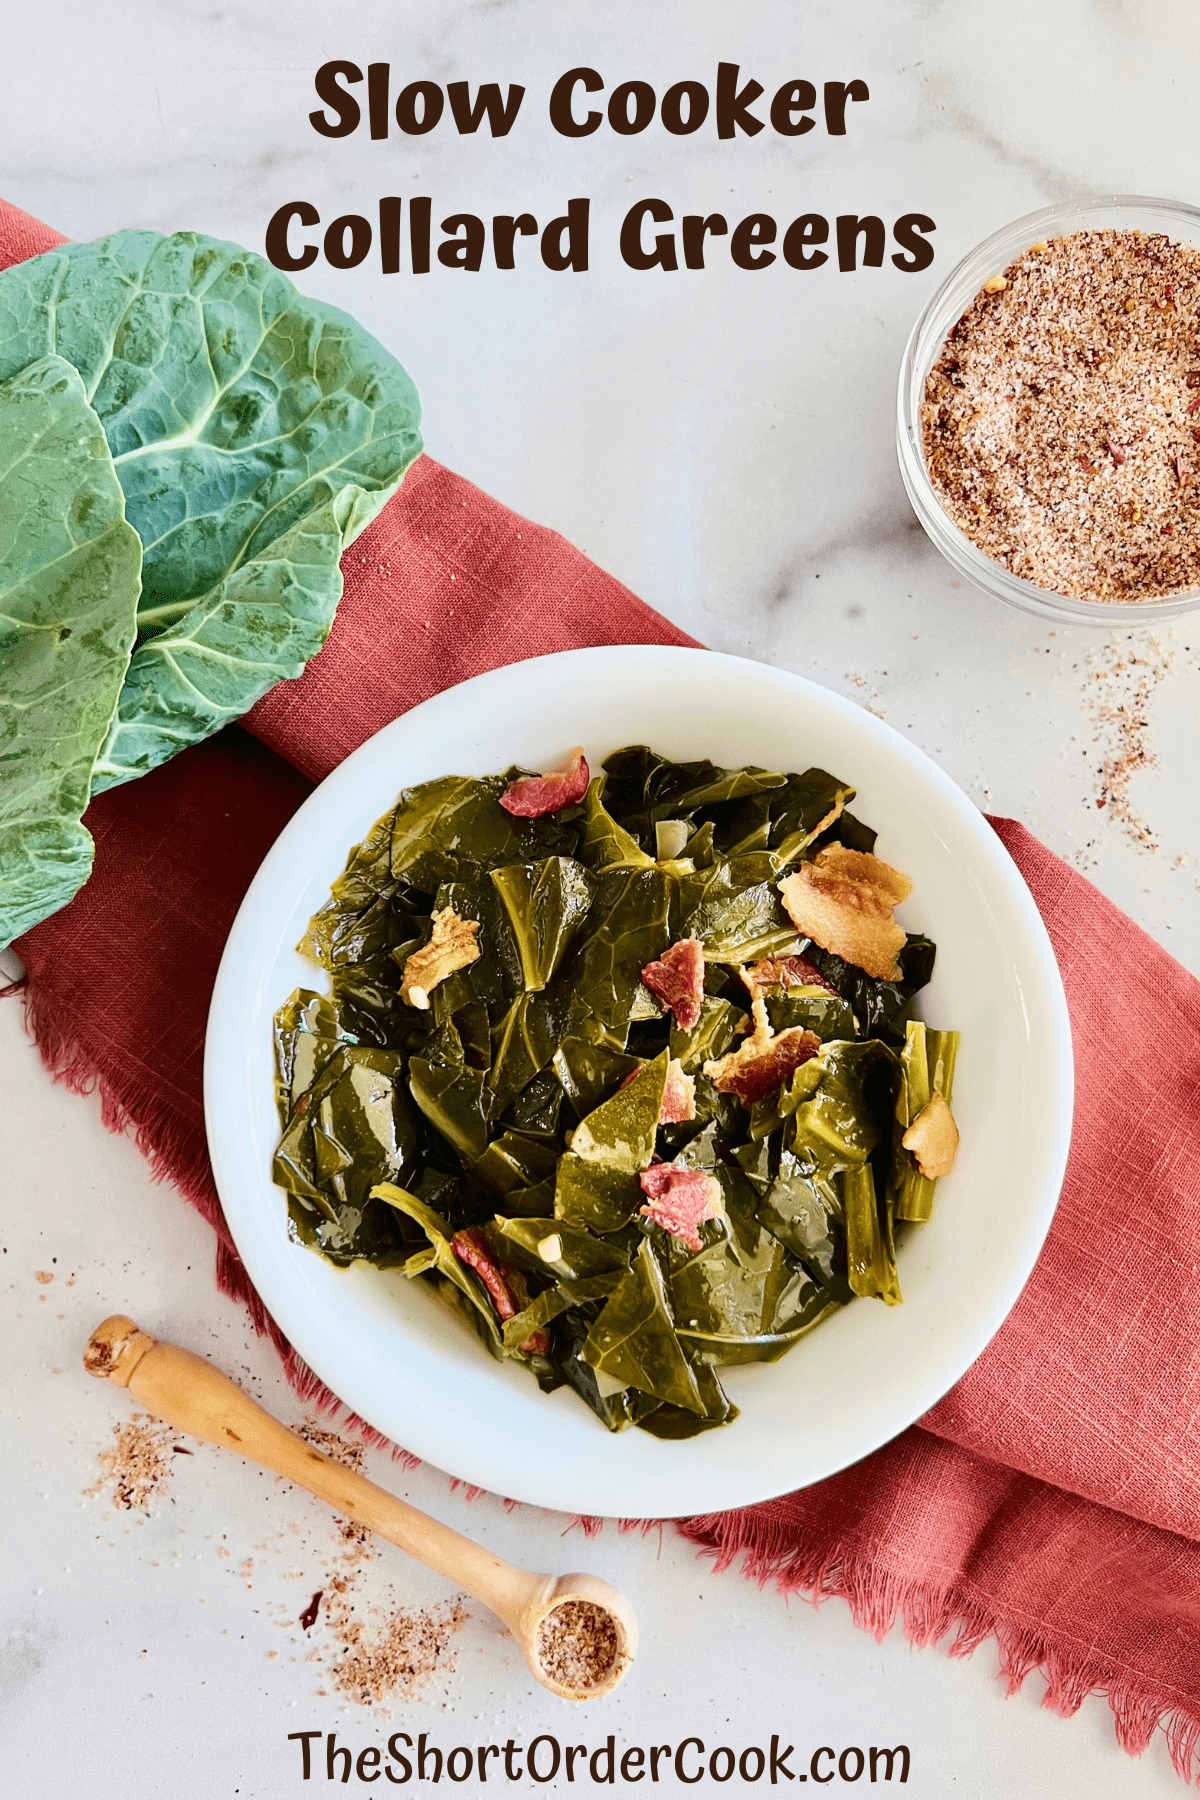 Bowl of bacon collard greens ready to eat.